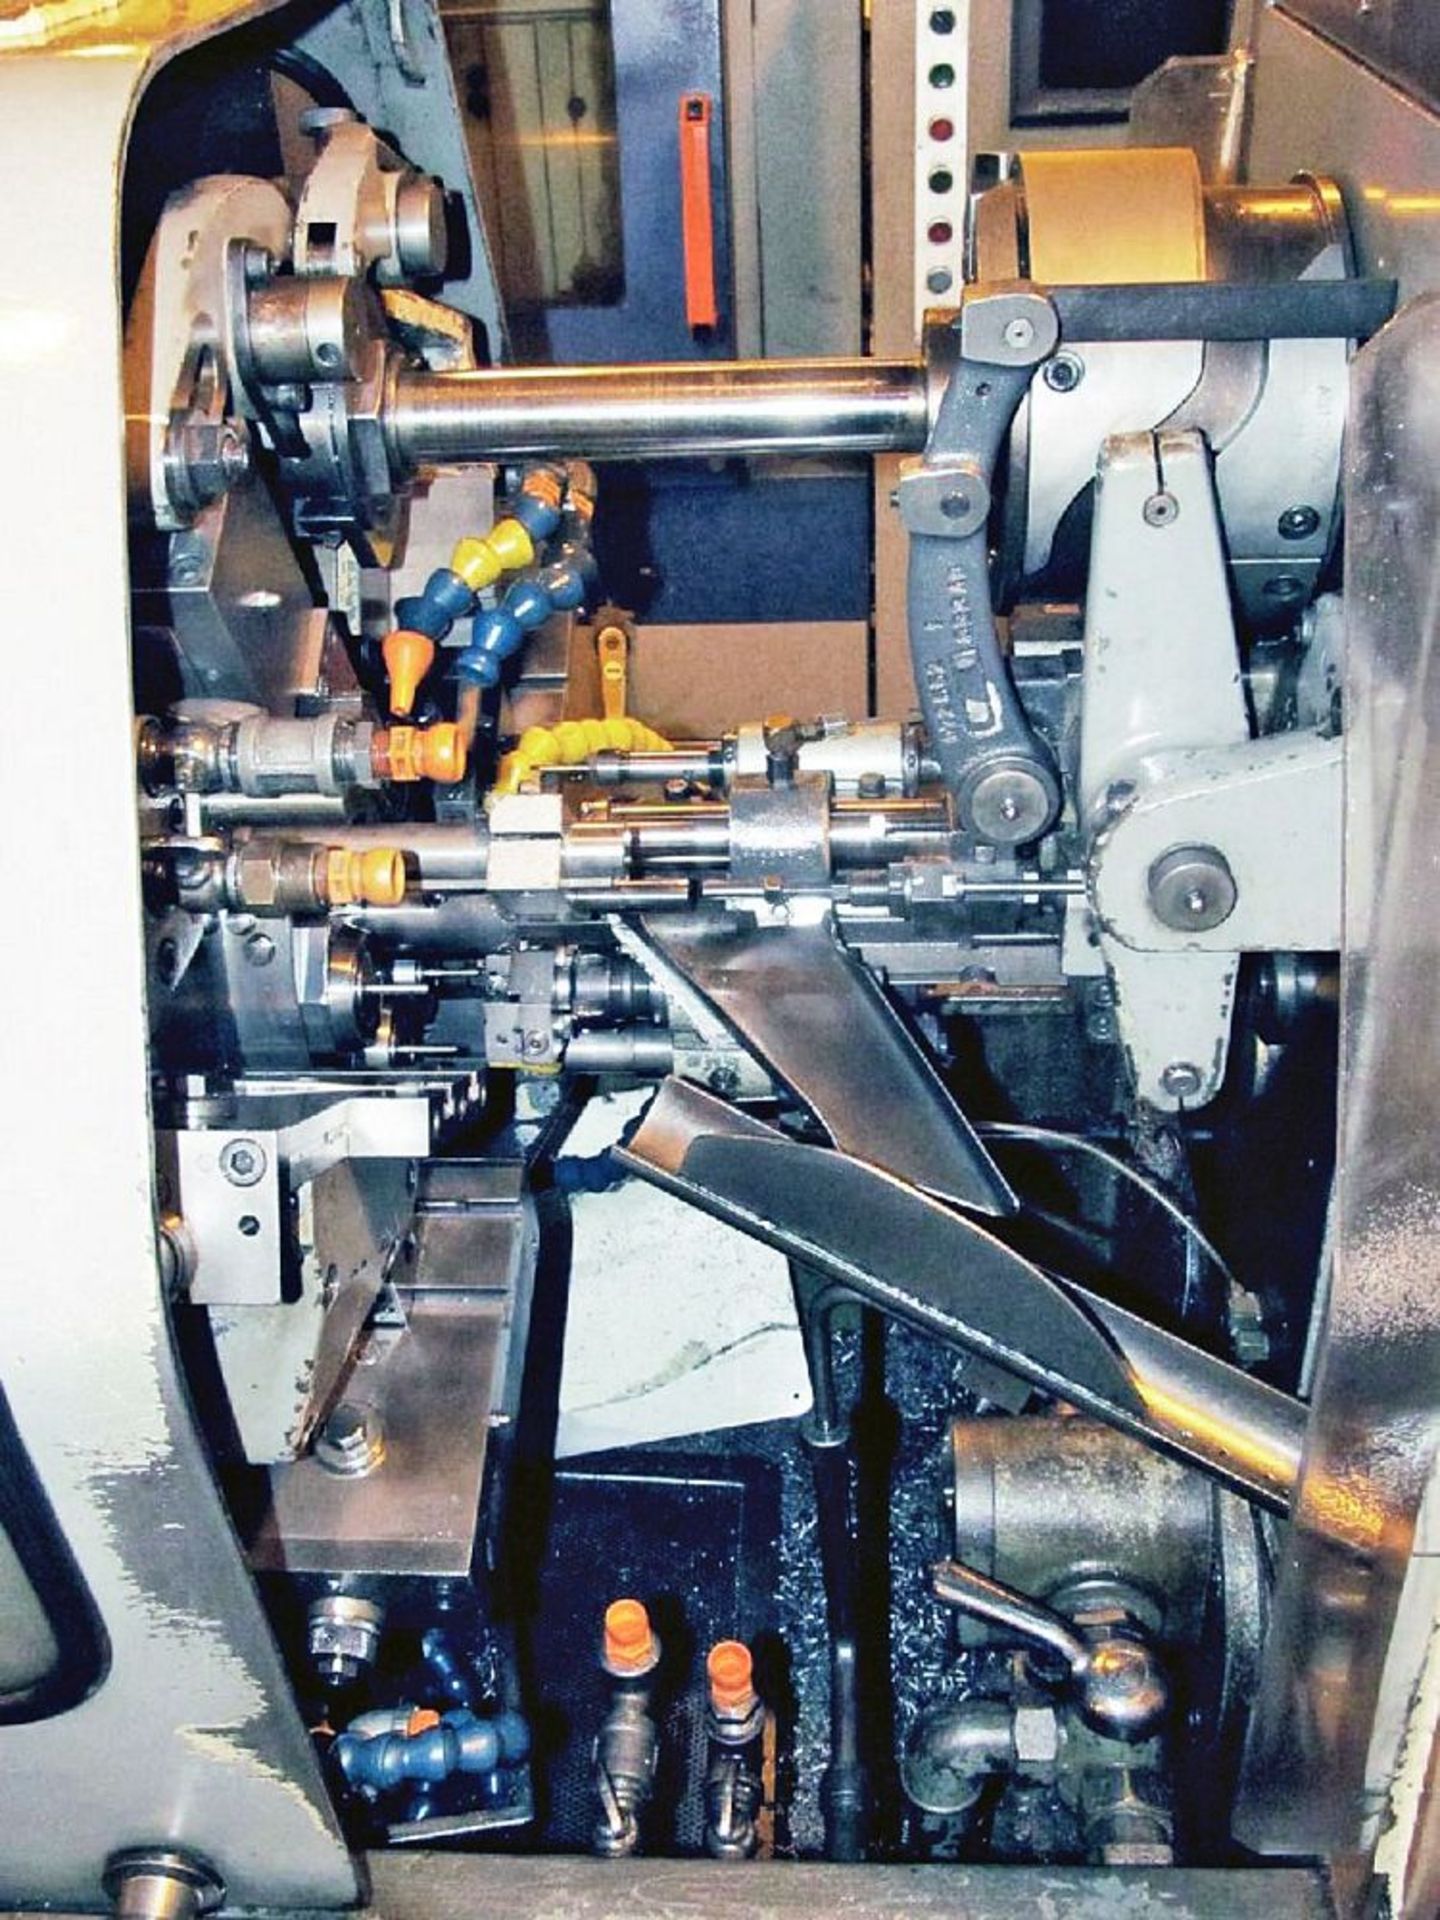 Tornos Model AS14 6-Spindle Automatic Screw Machine - Image 4 of 5